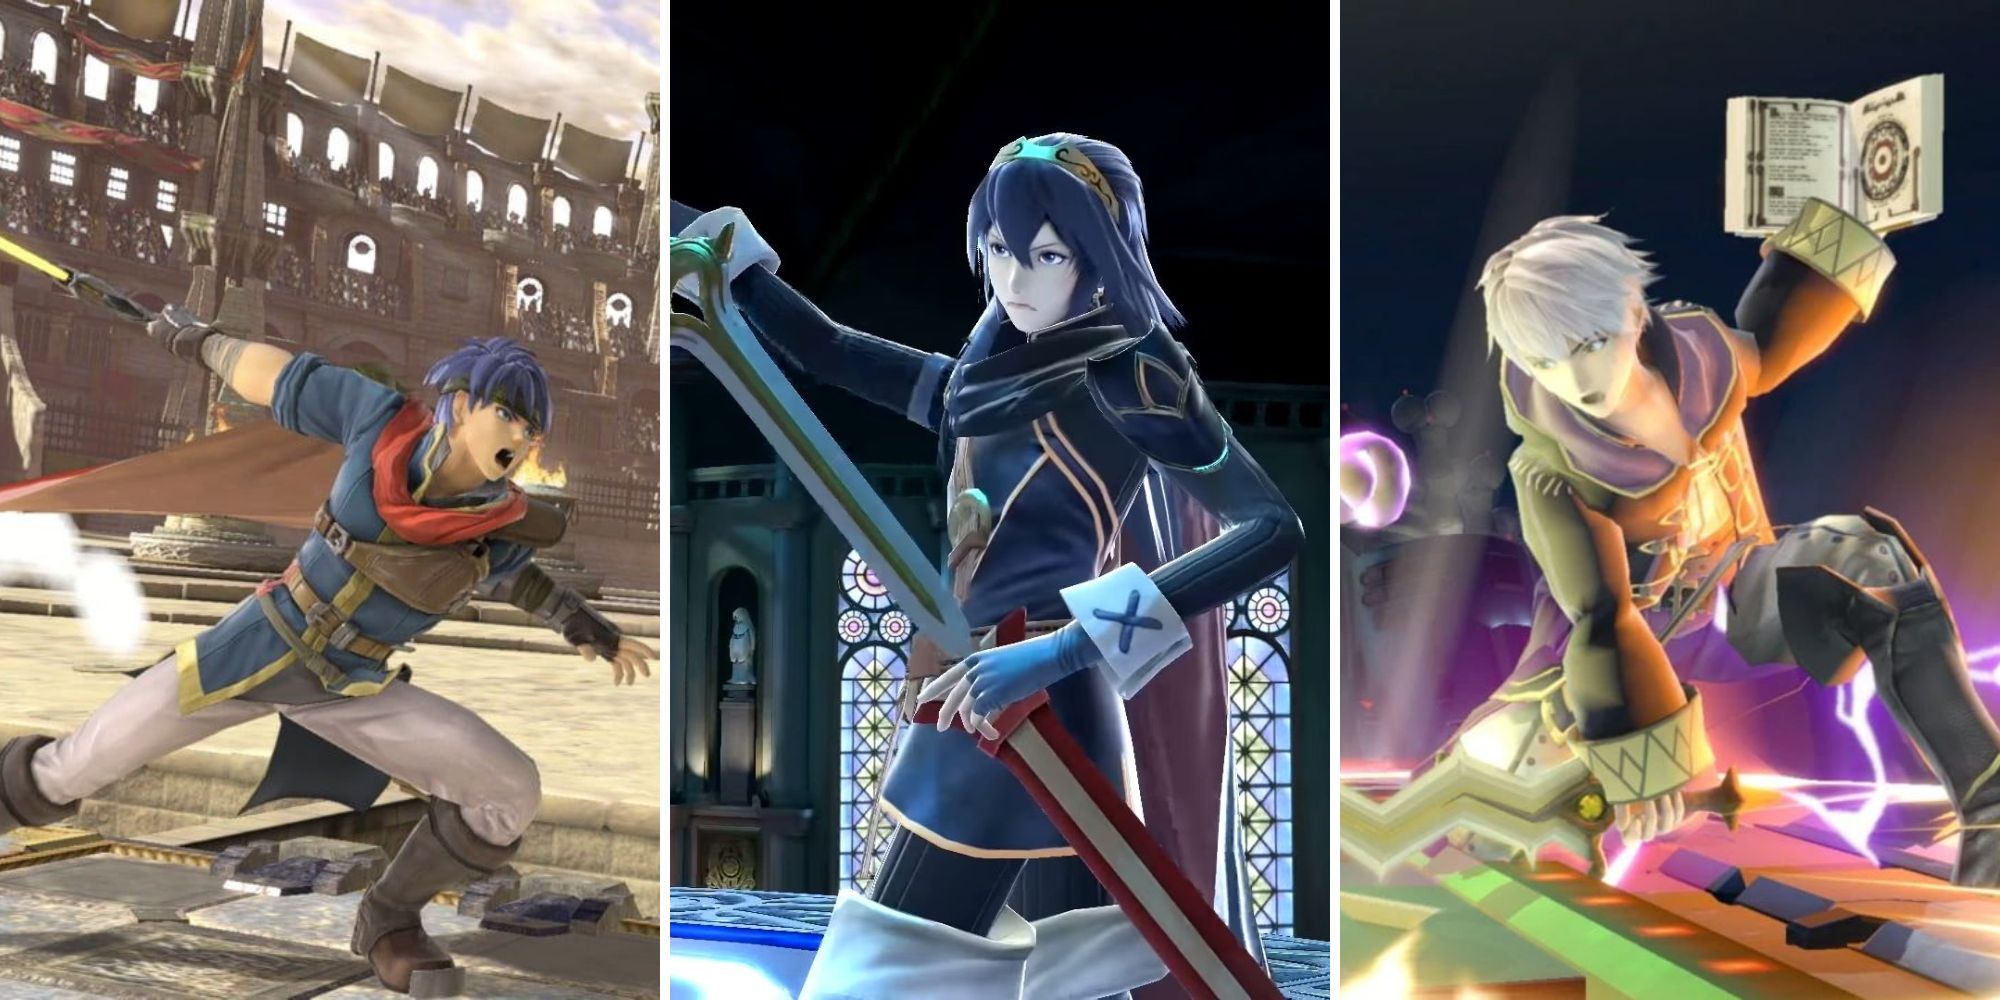 Ike lunges forward, Lucina draws her sword, Robin uses magic